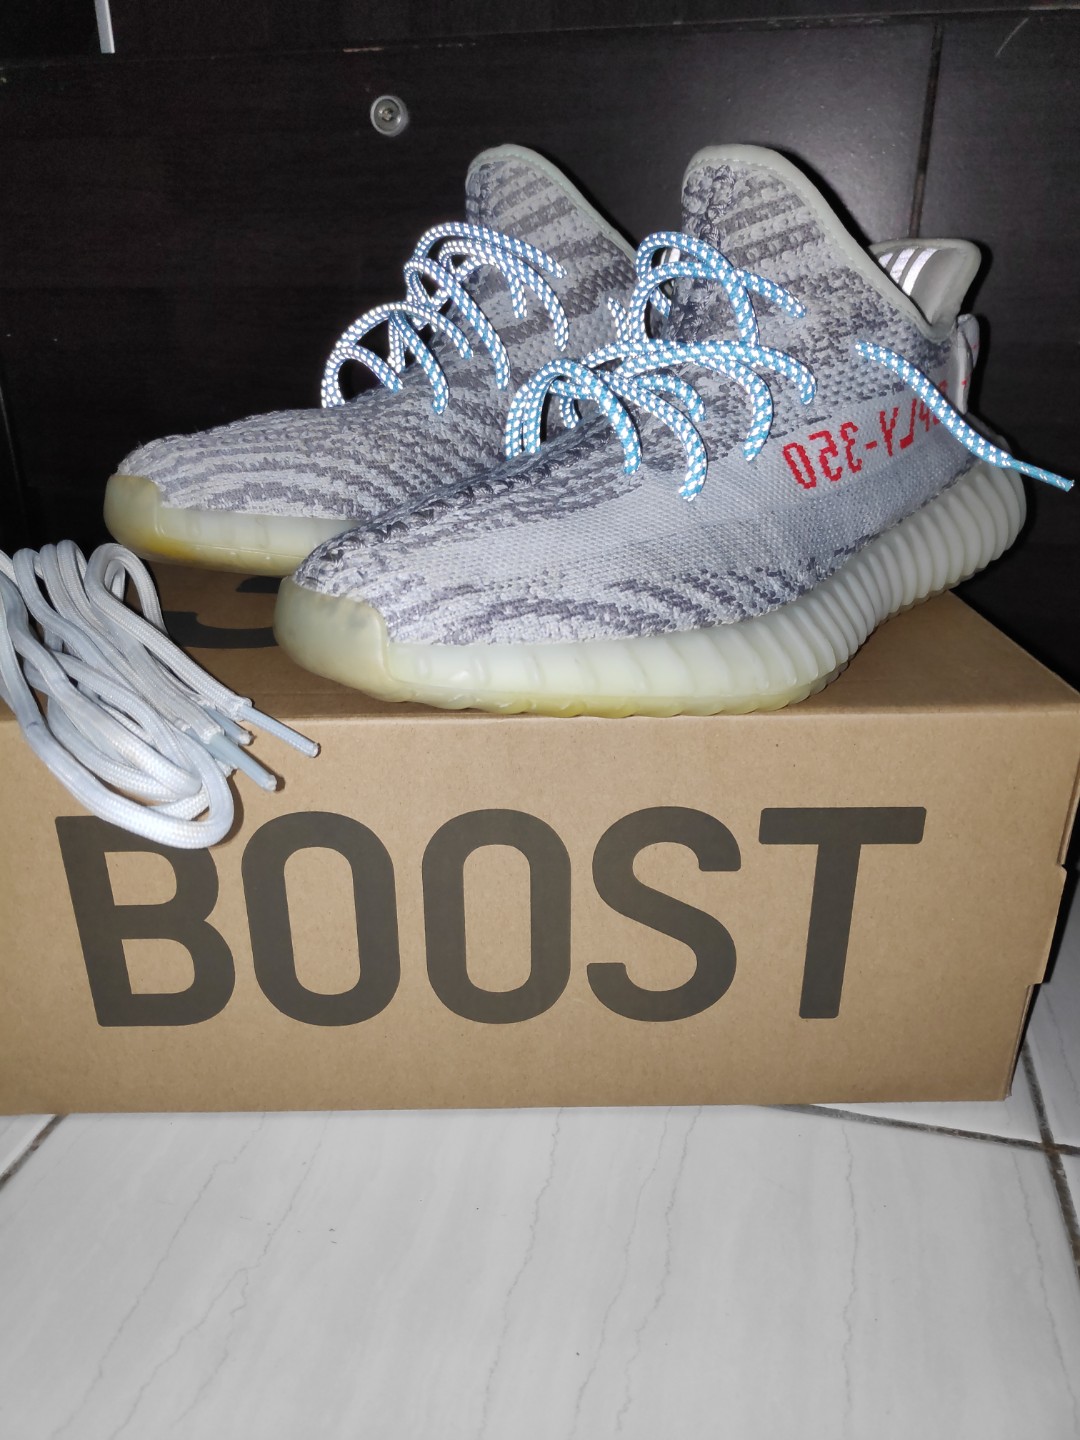 yeezy blue tint laces for sale